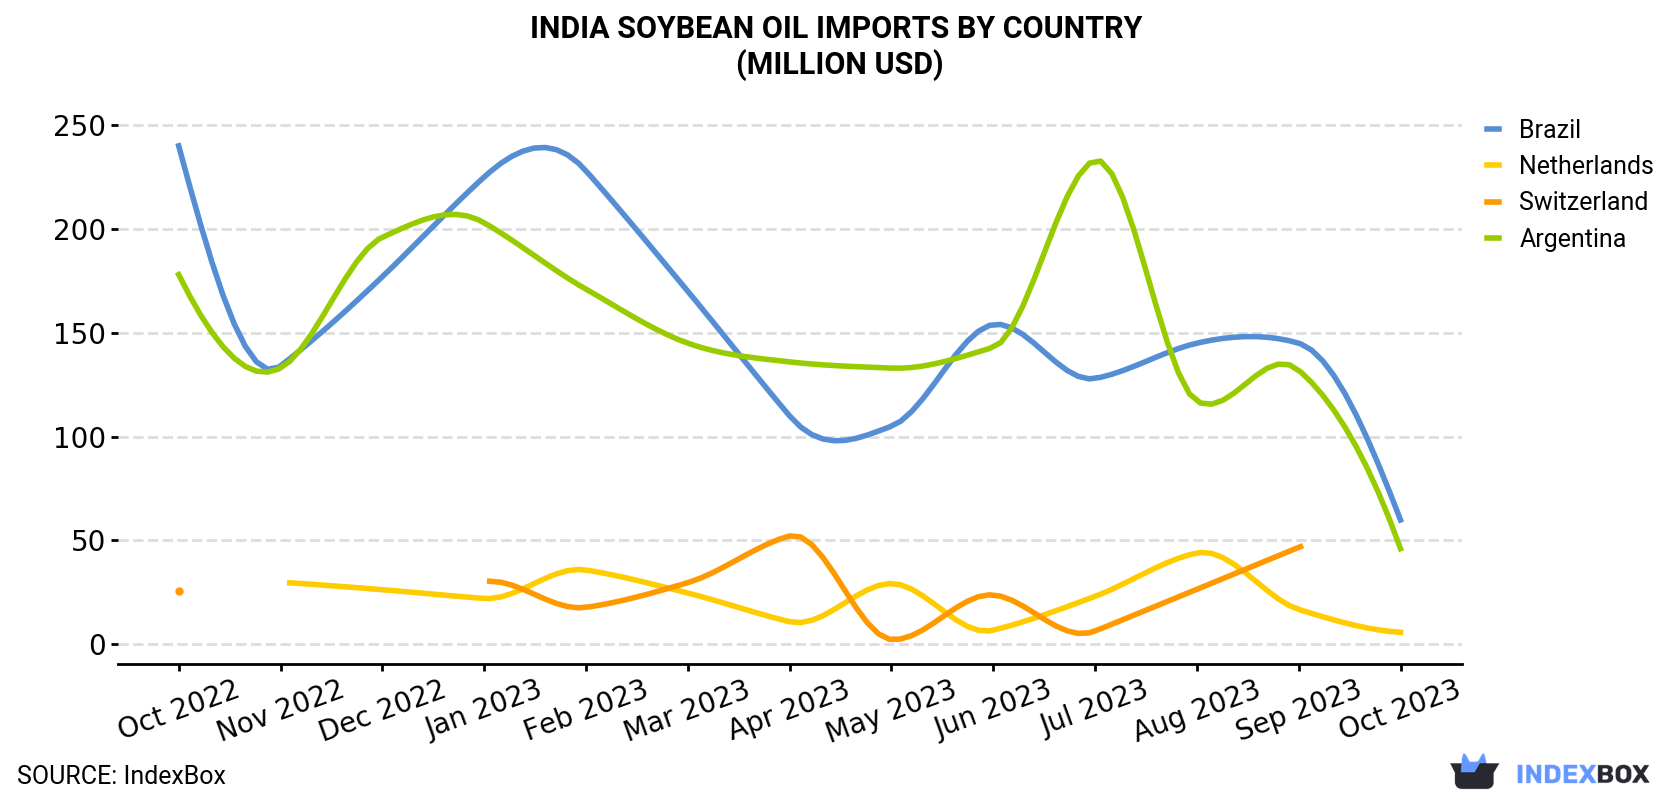 India Soybean Oil Imports By Country (Million USD)